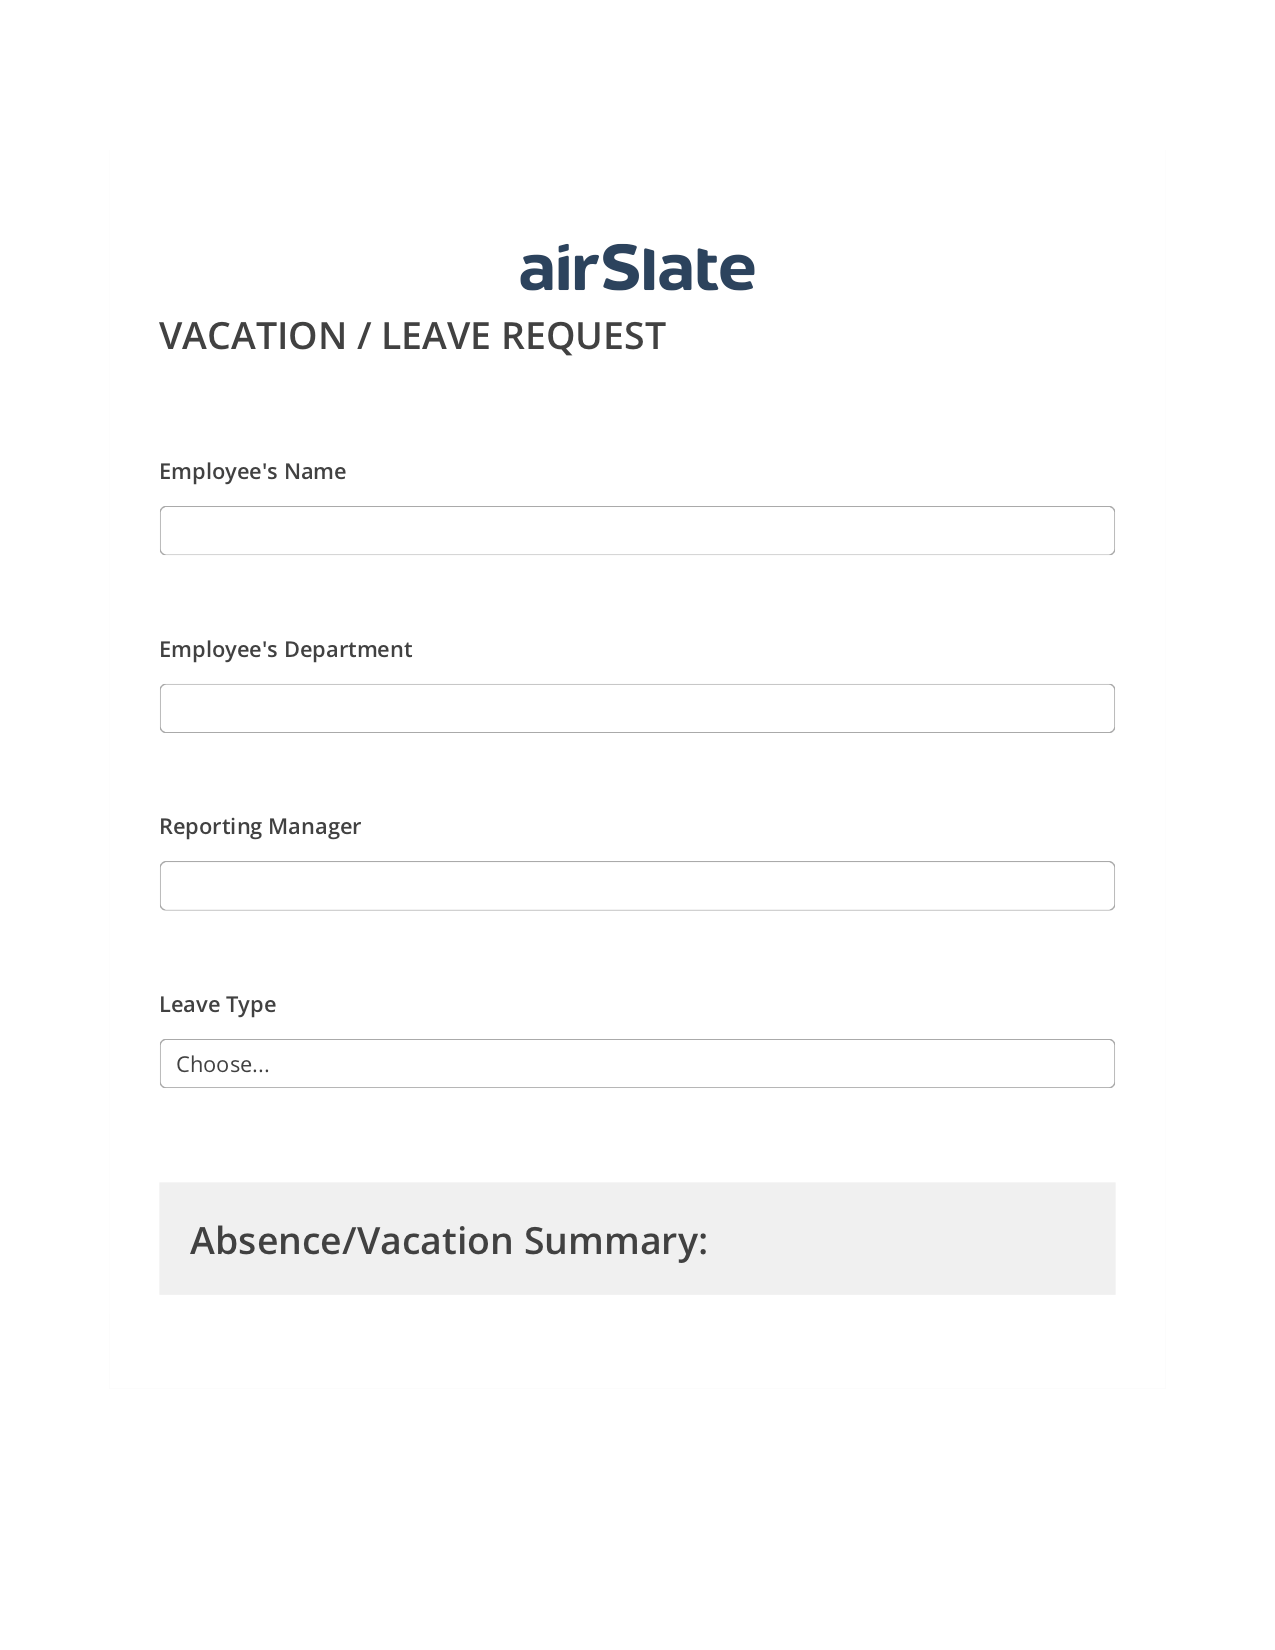 Vacation/Leave Request Workflow Pre-fill Dropdowns from Airtable, SendGrid send Campaign bot, Webhook Postfinish Bot